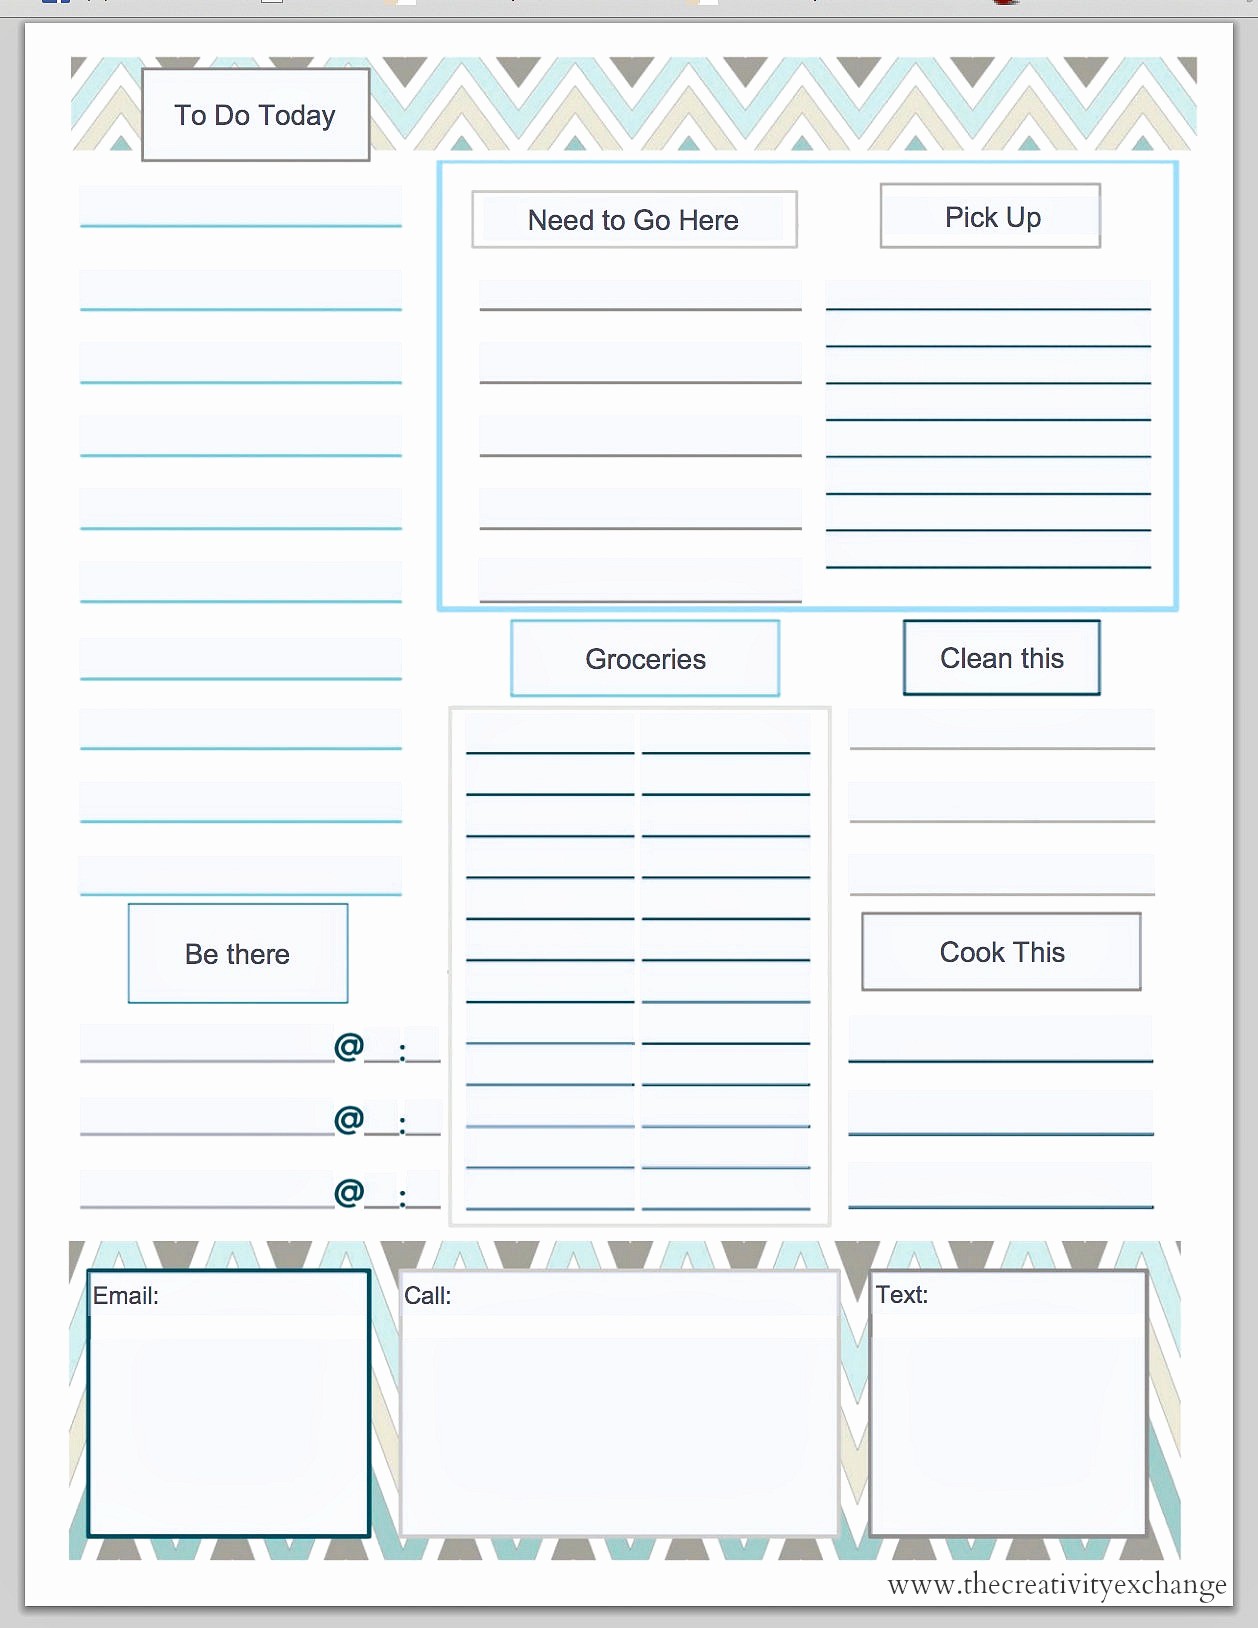 Today to Do List Template Beautiful Customizable and Free Printable to Do List that You Can Edit